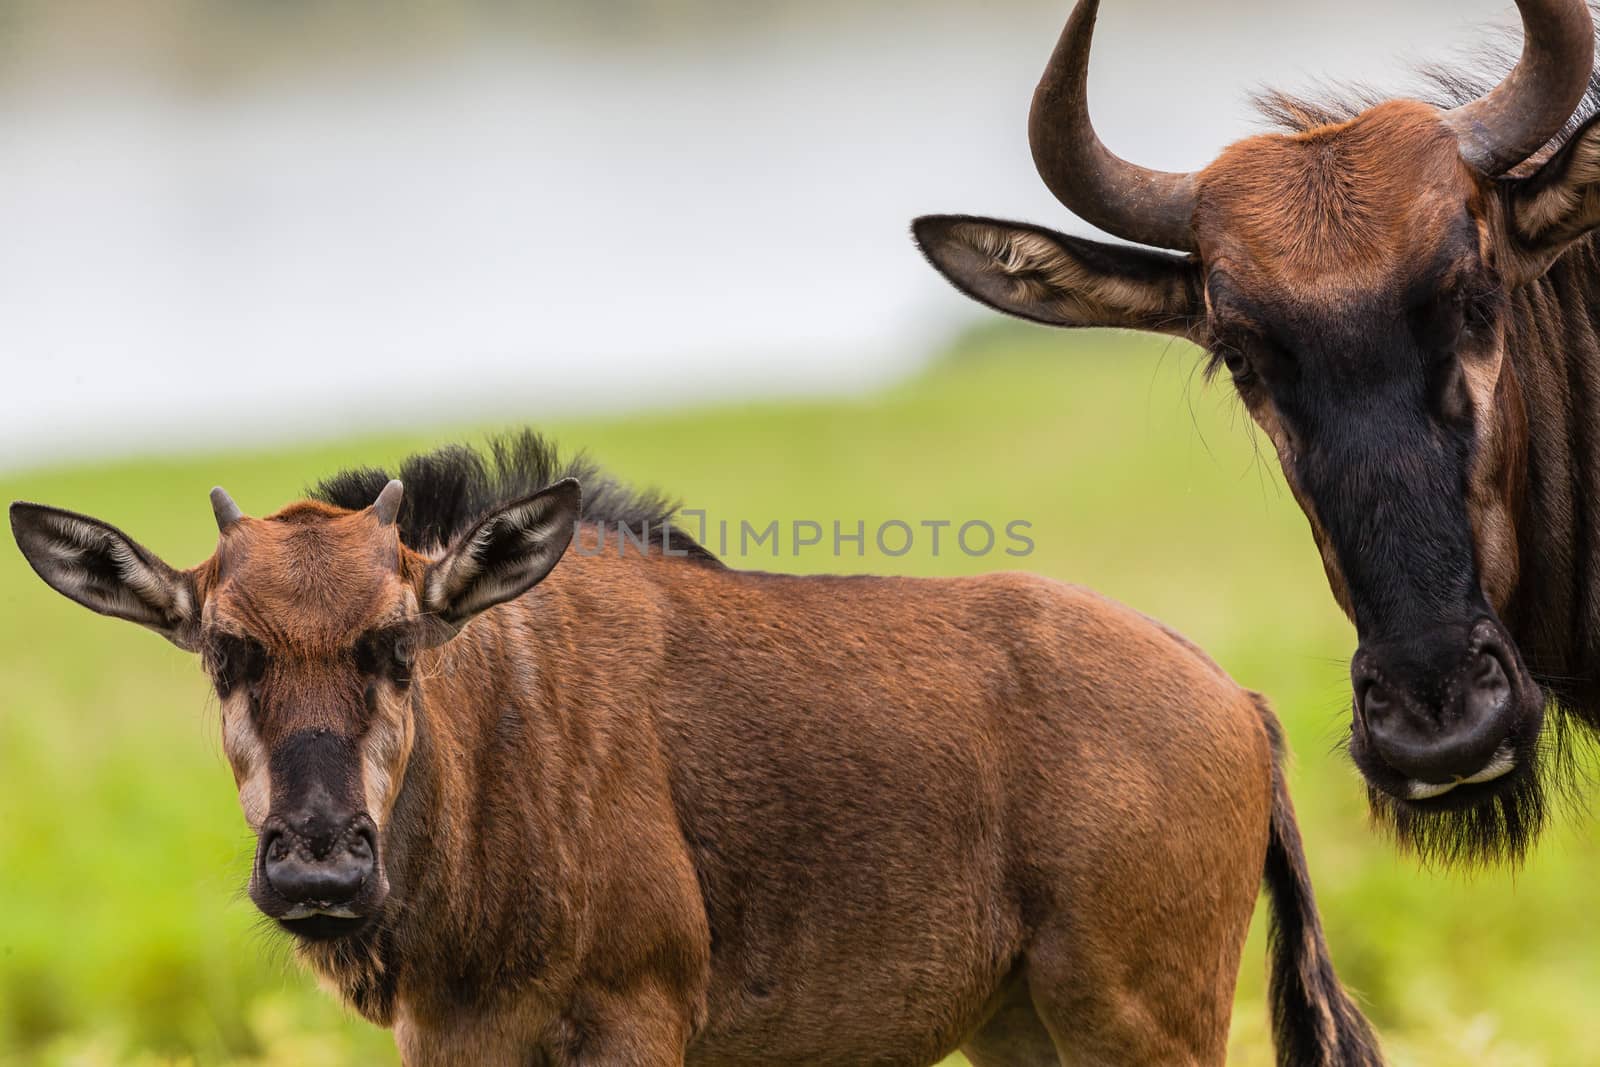 Close portrait of wildlife animals a blue-wildebeest protects new born calf.